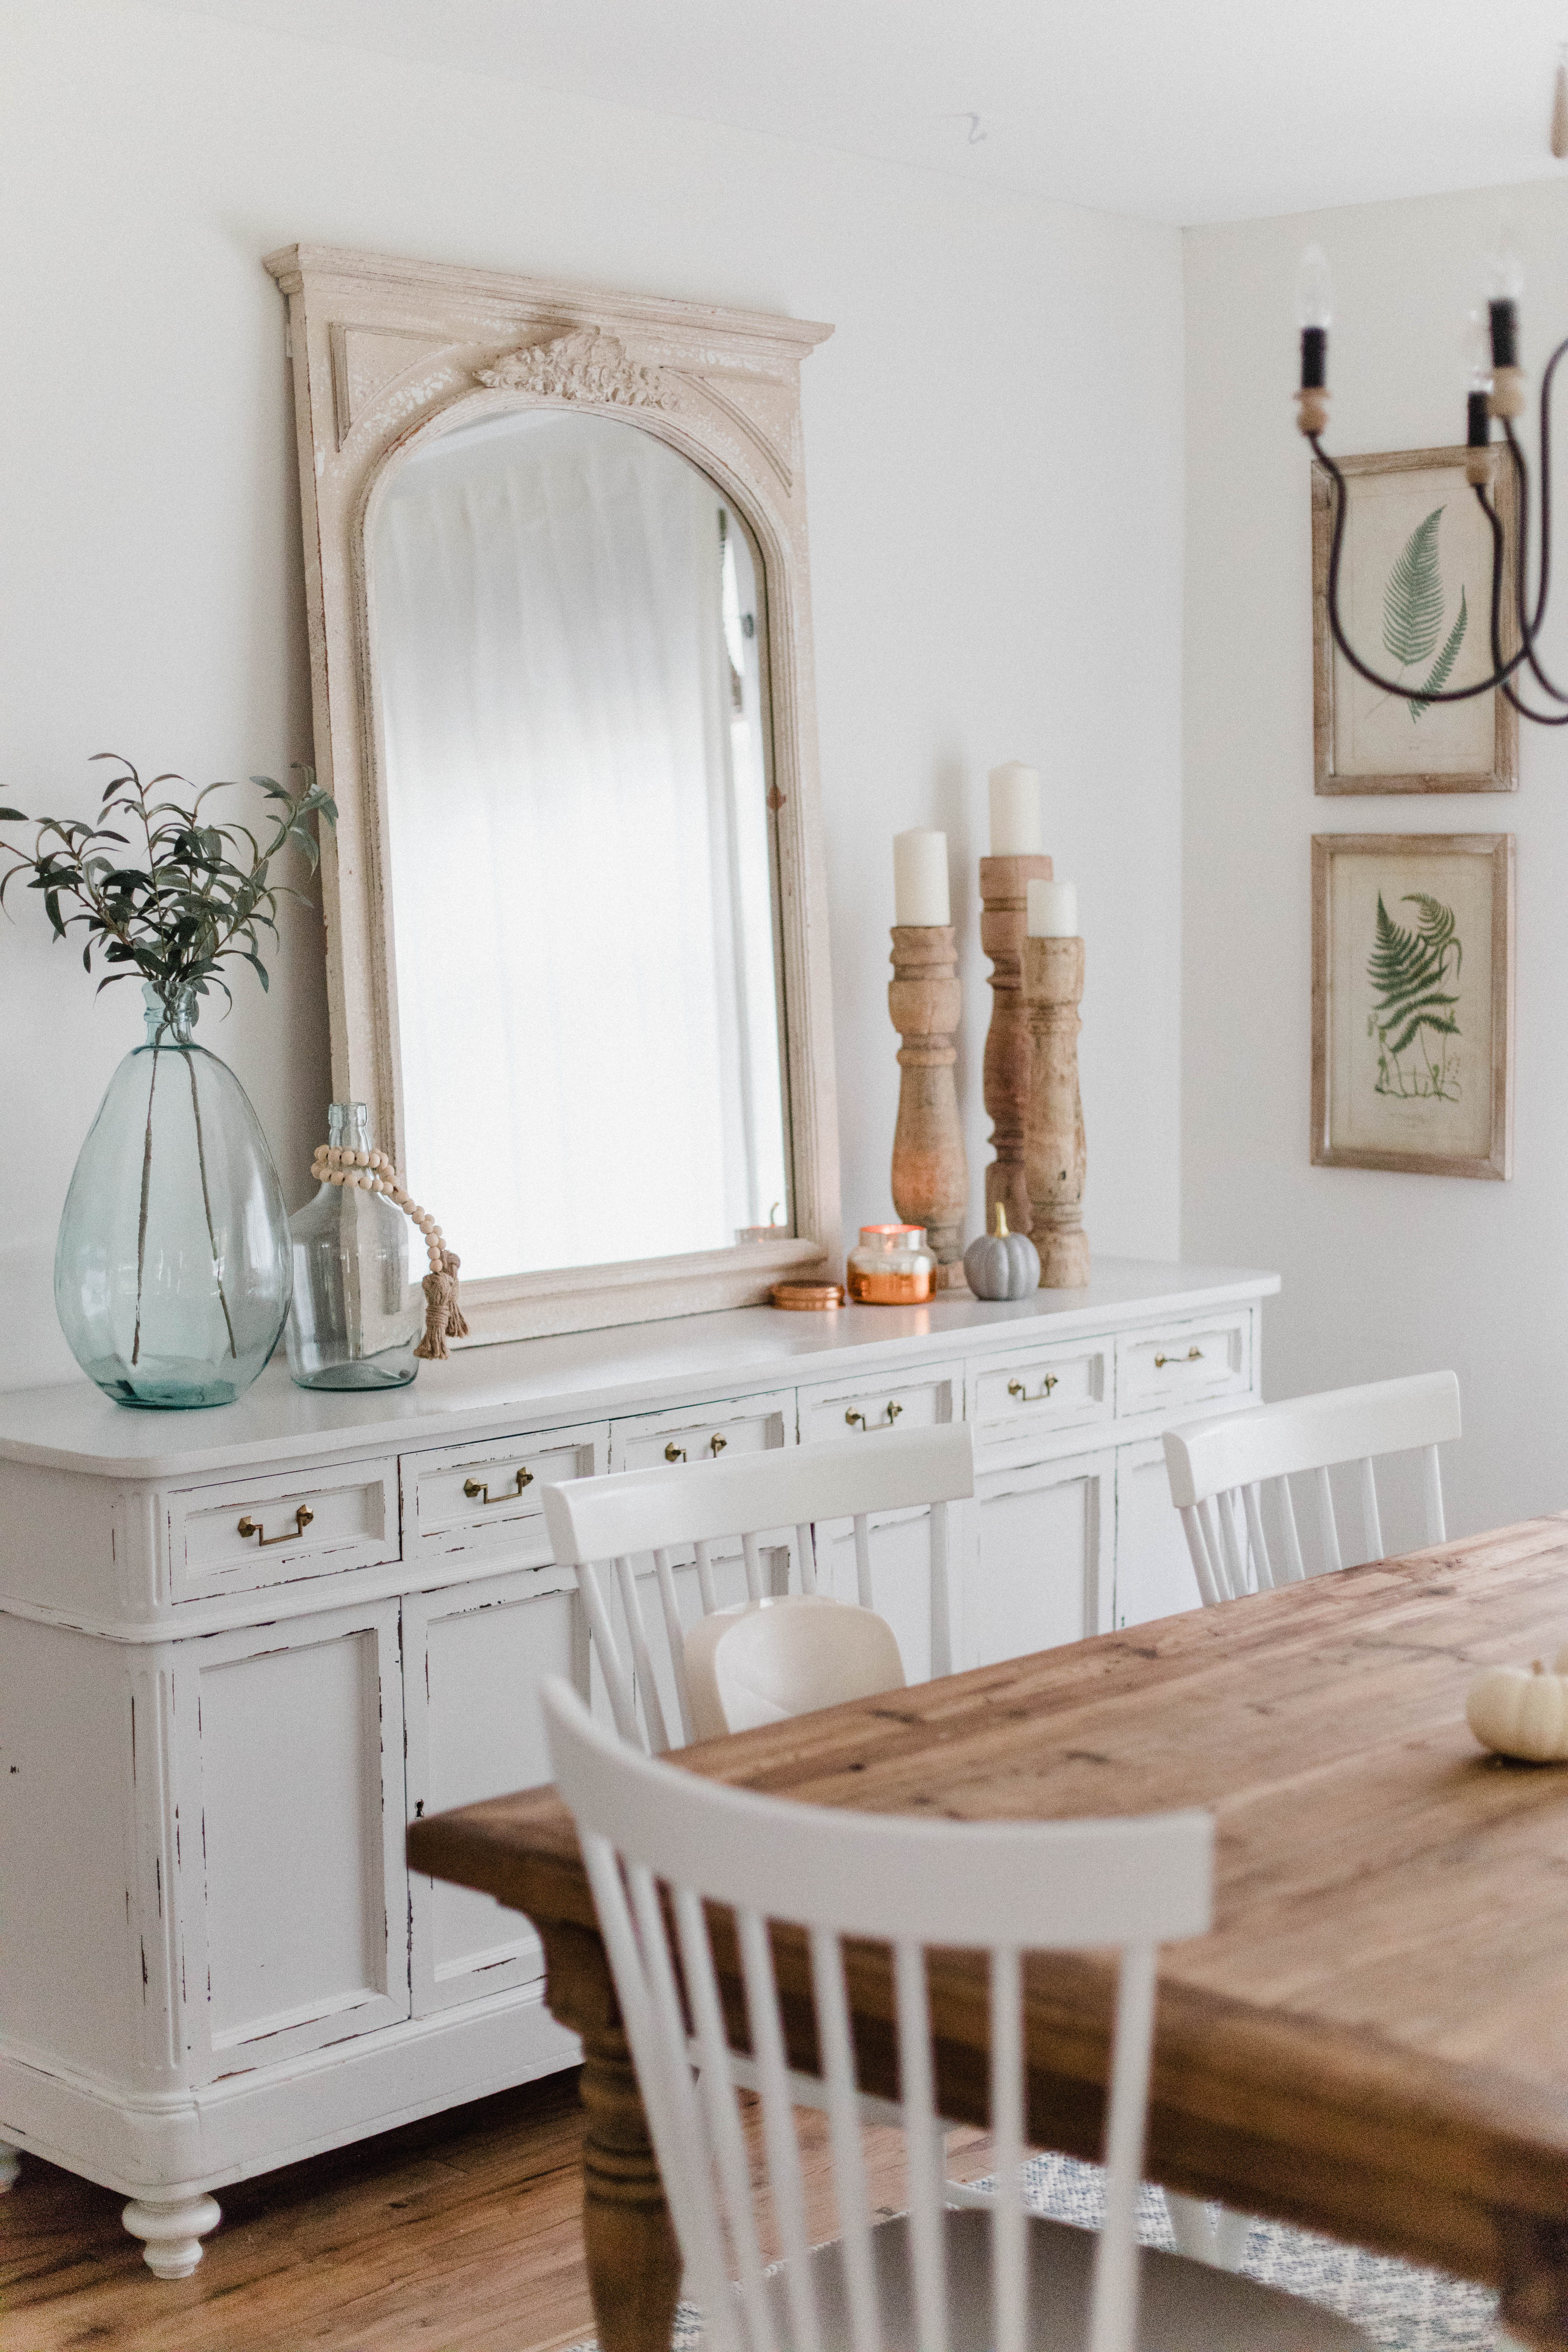 Connecticut life and style blogger Lauren McBride shares about the cost-effectiveness and energy efficiency of LED lighting in the home, as well as the difference in lighting color.